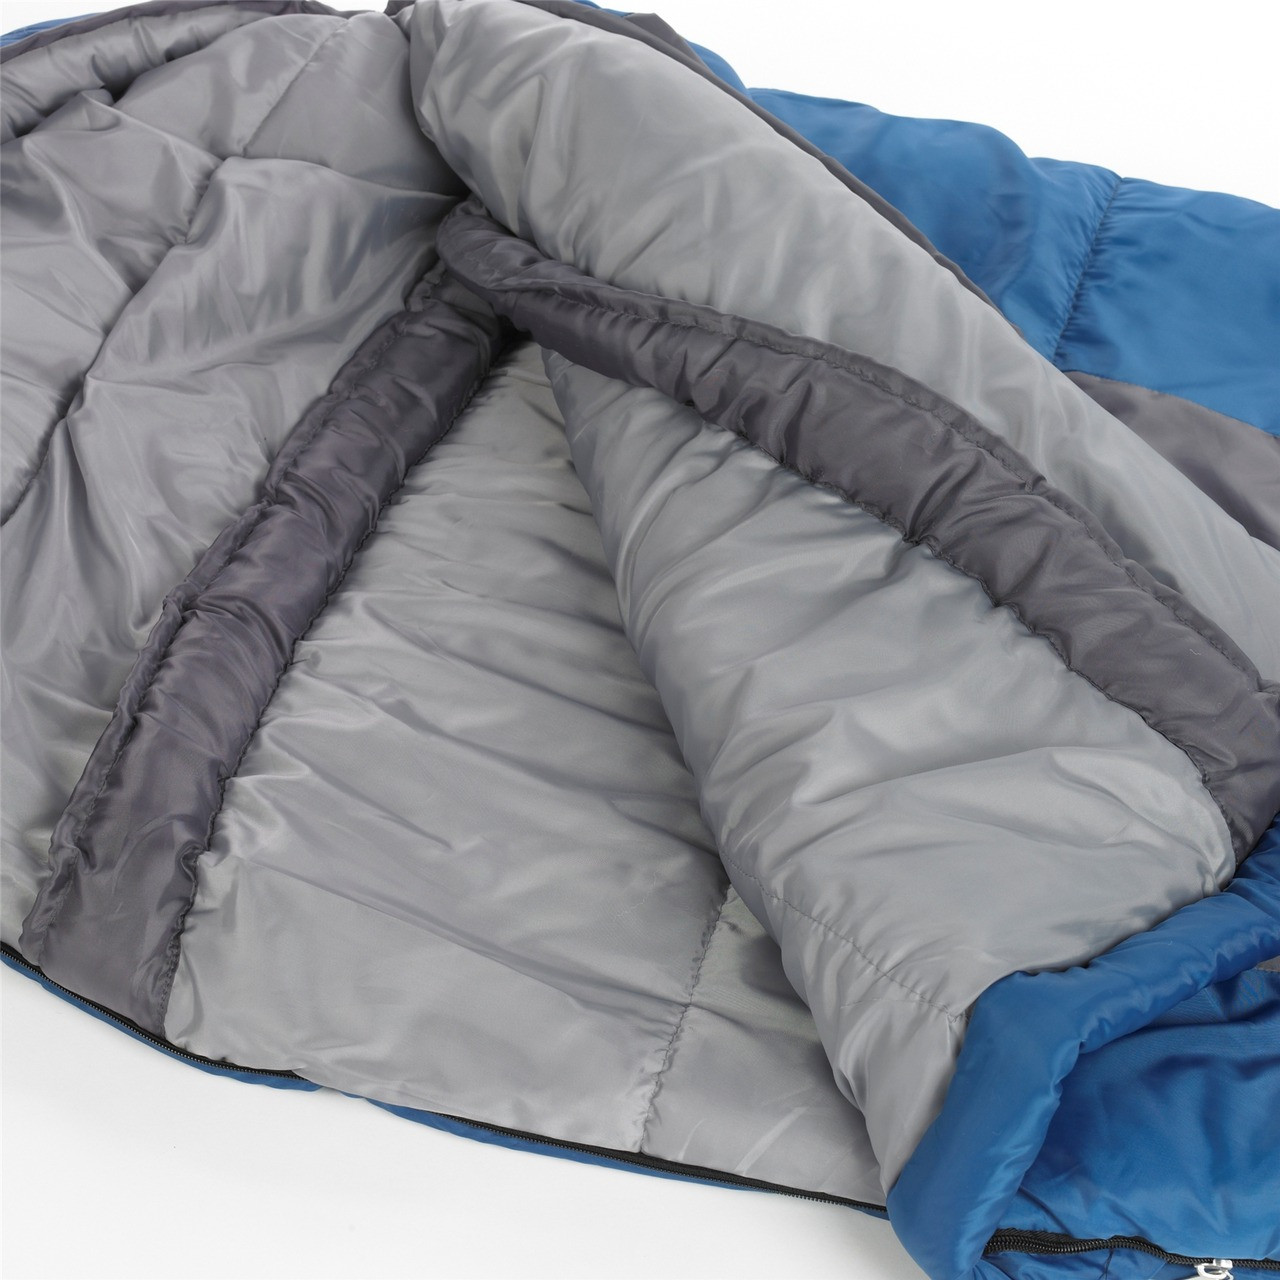 Close up view of the Wenzel Santa Fe Mummy 20 degree sleeping bag partially folded open showing the gray draft collar